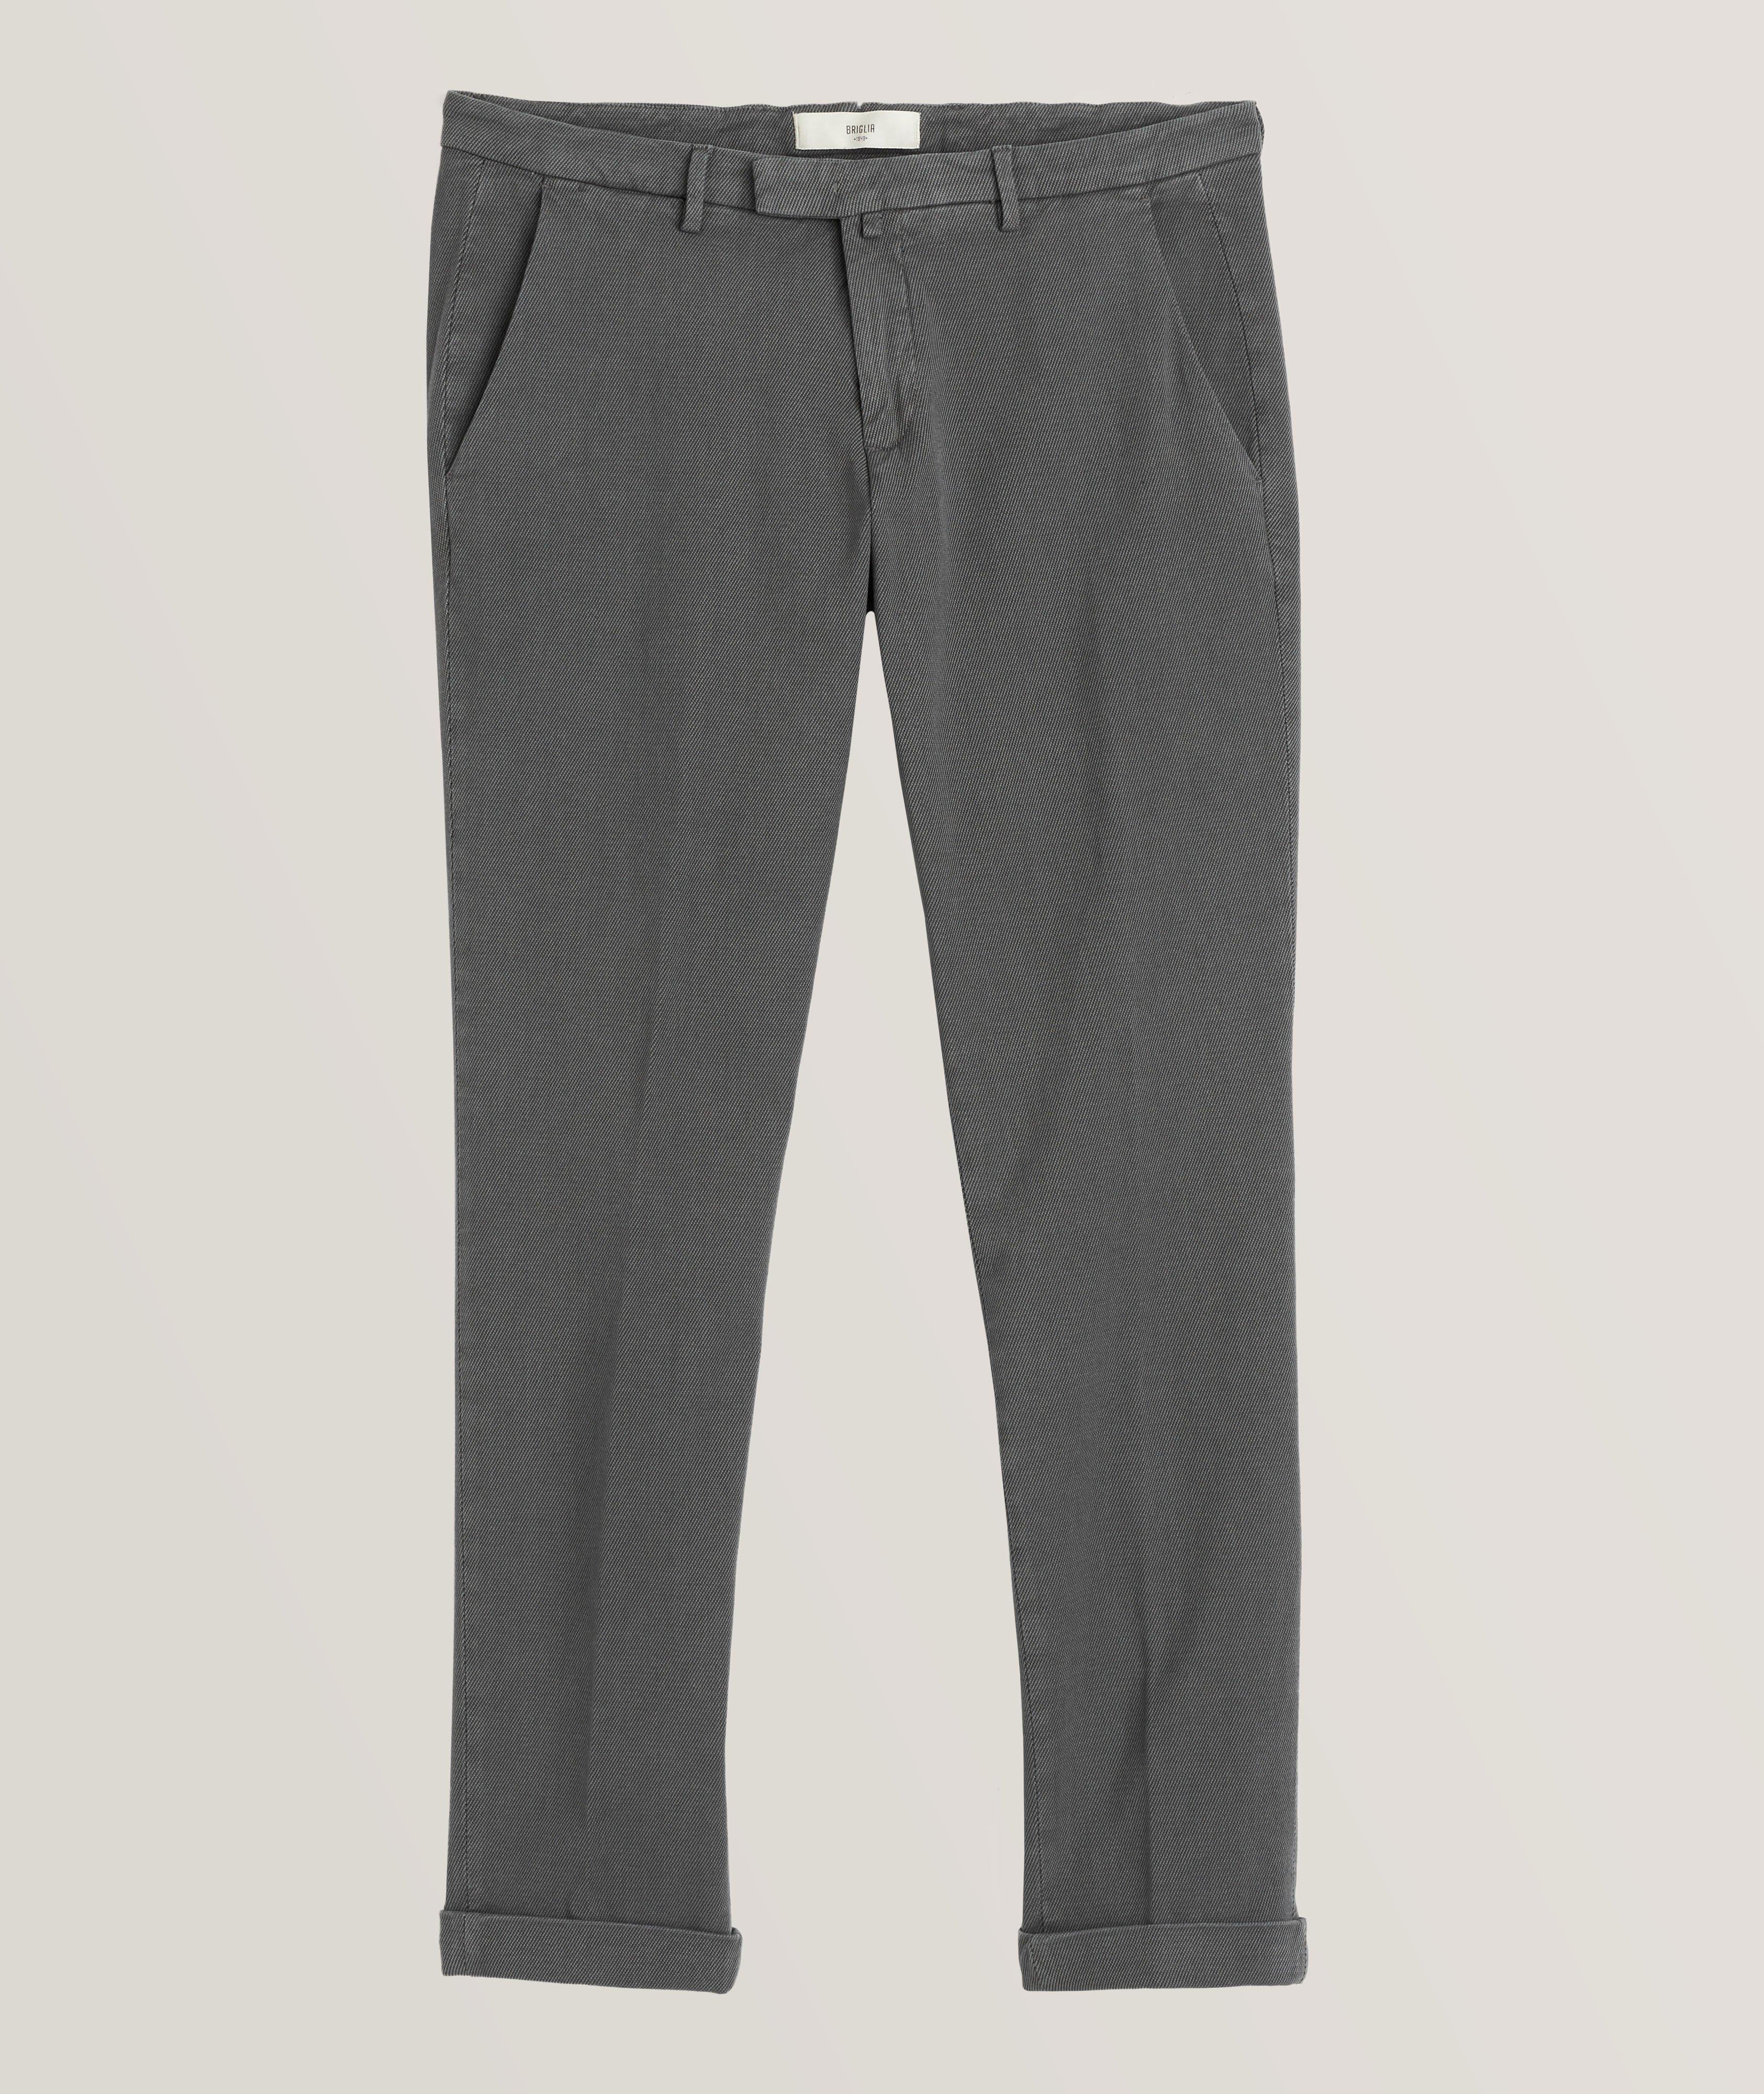 Textured Stretch-Cotton Jersey Chinos image 0